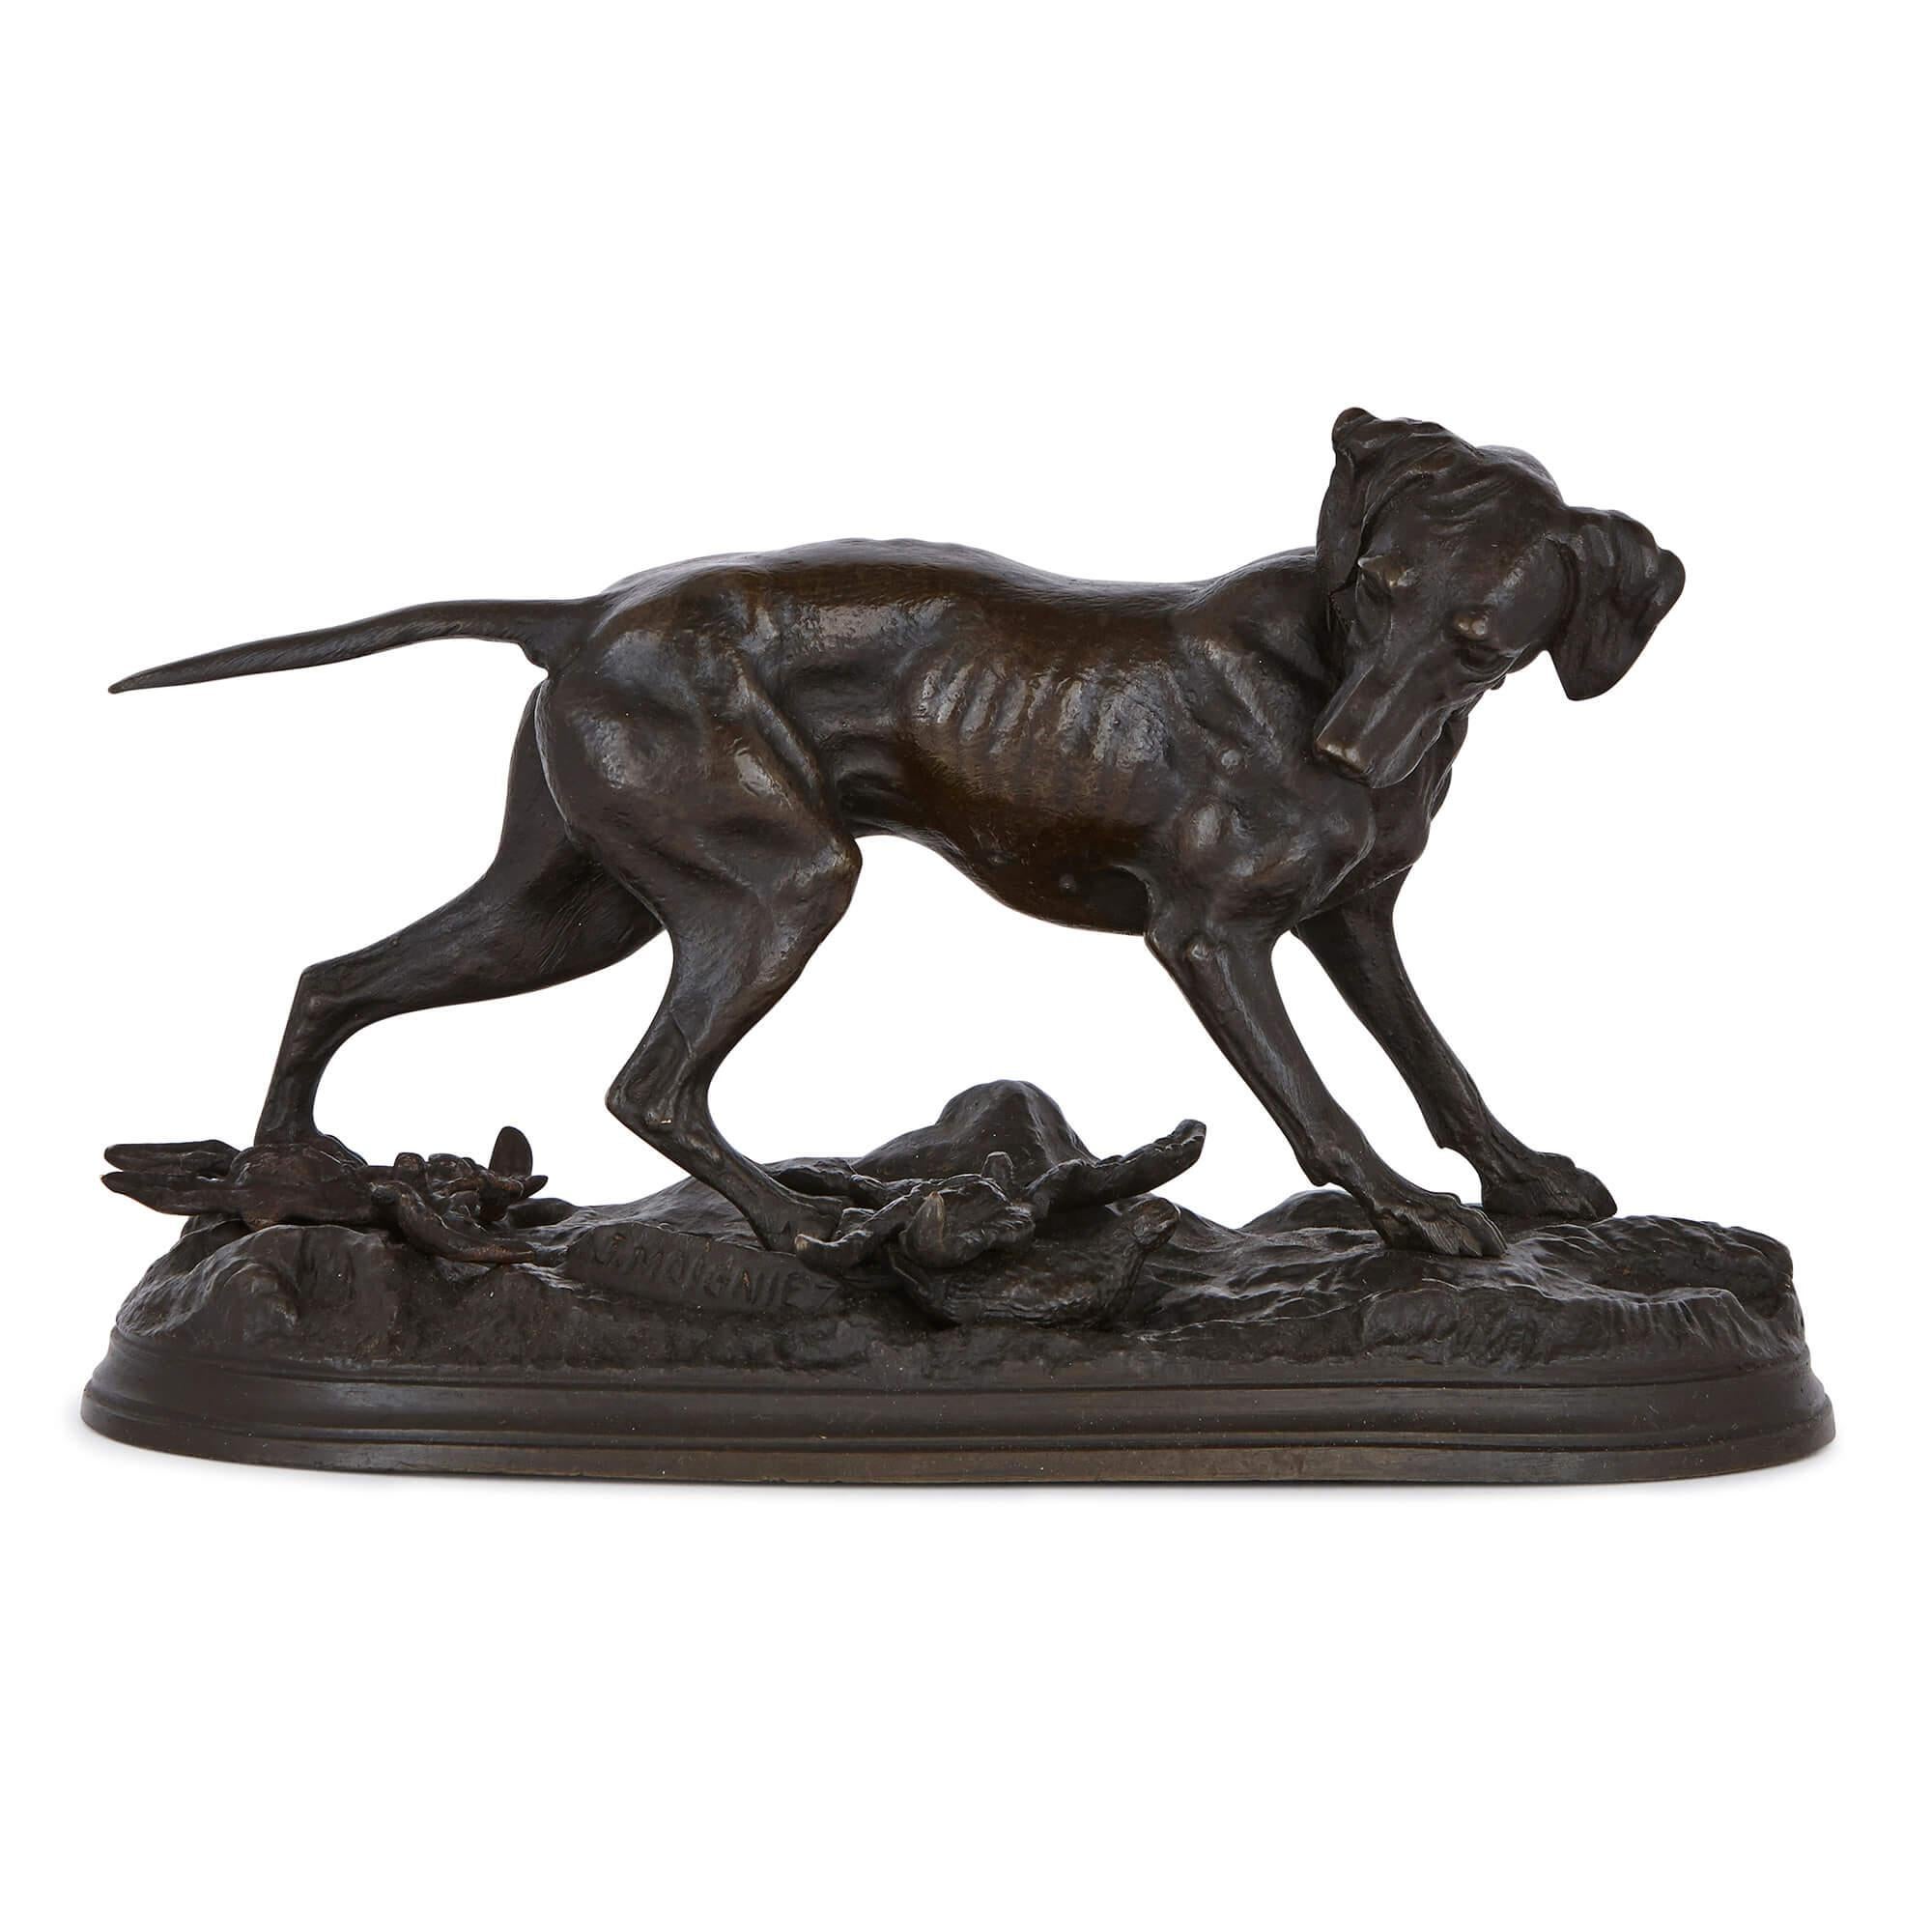 These charming bronze dogs are Fine works by the important 19th Century maker, Jules Moigniez (French, 1835-1894), and would make a unique gift to a dog-lover or those with an interest in antique sculpture. Each model shows a dog standing alert with